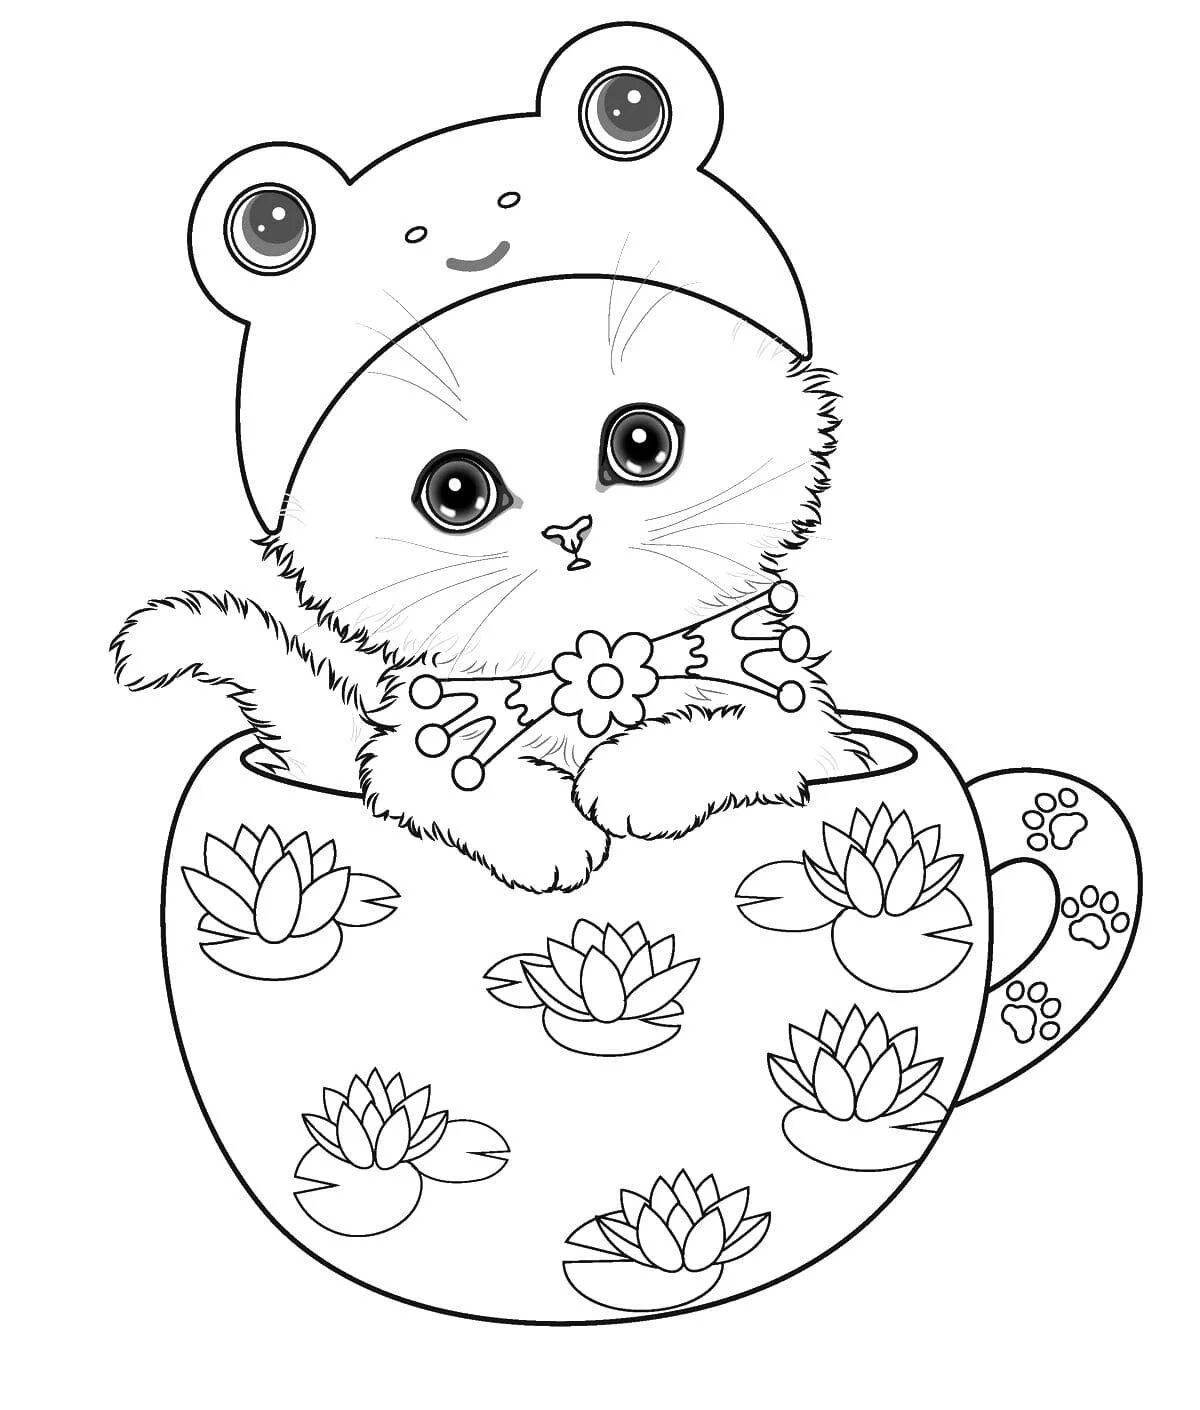 Cute and lovable cat coloring book